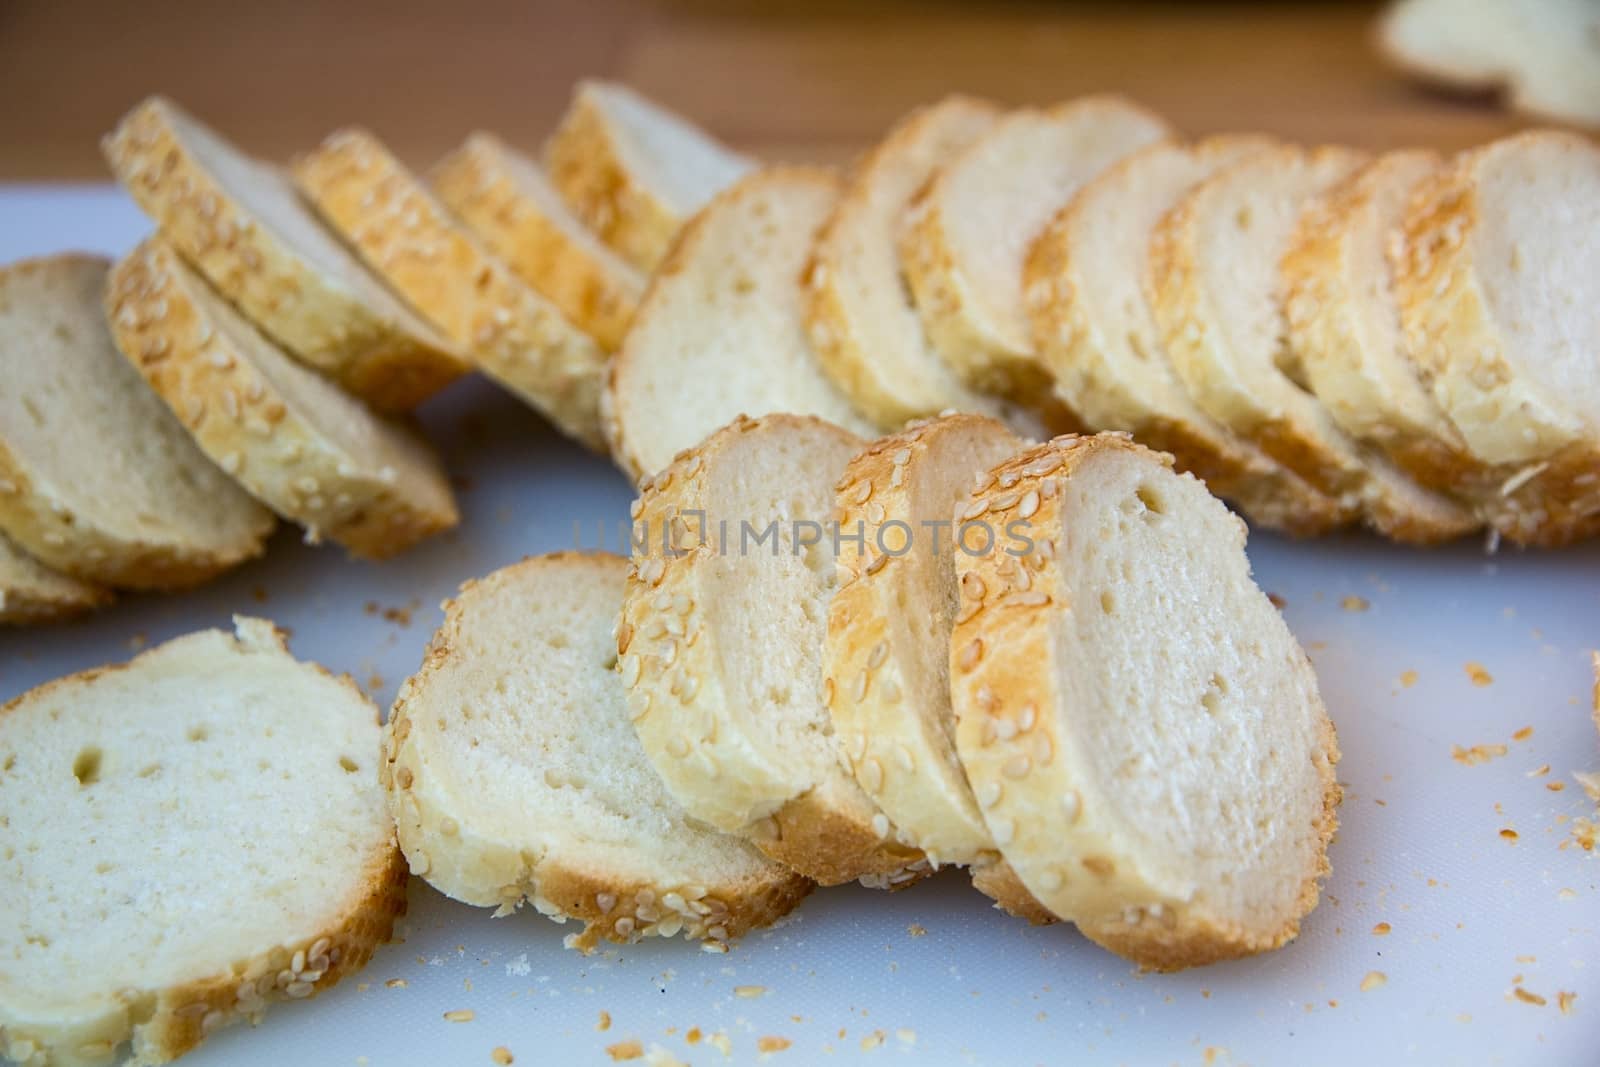 Sliced peaces of French baguette by dedmorozz